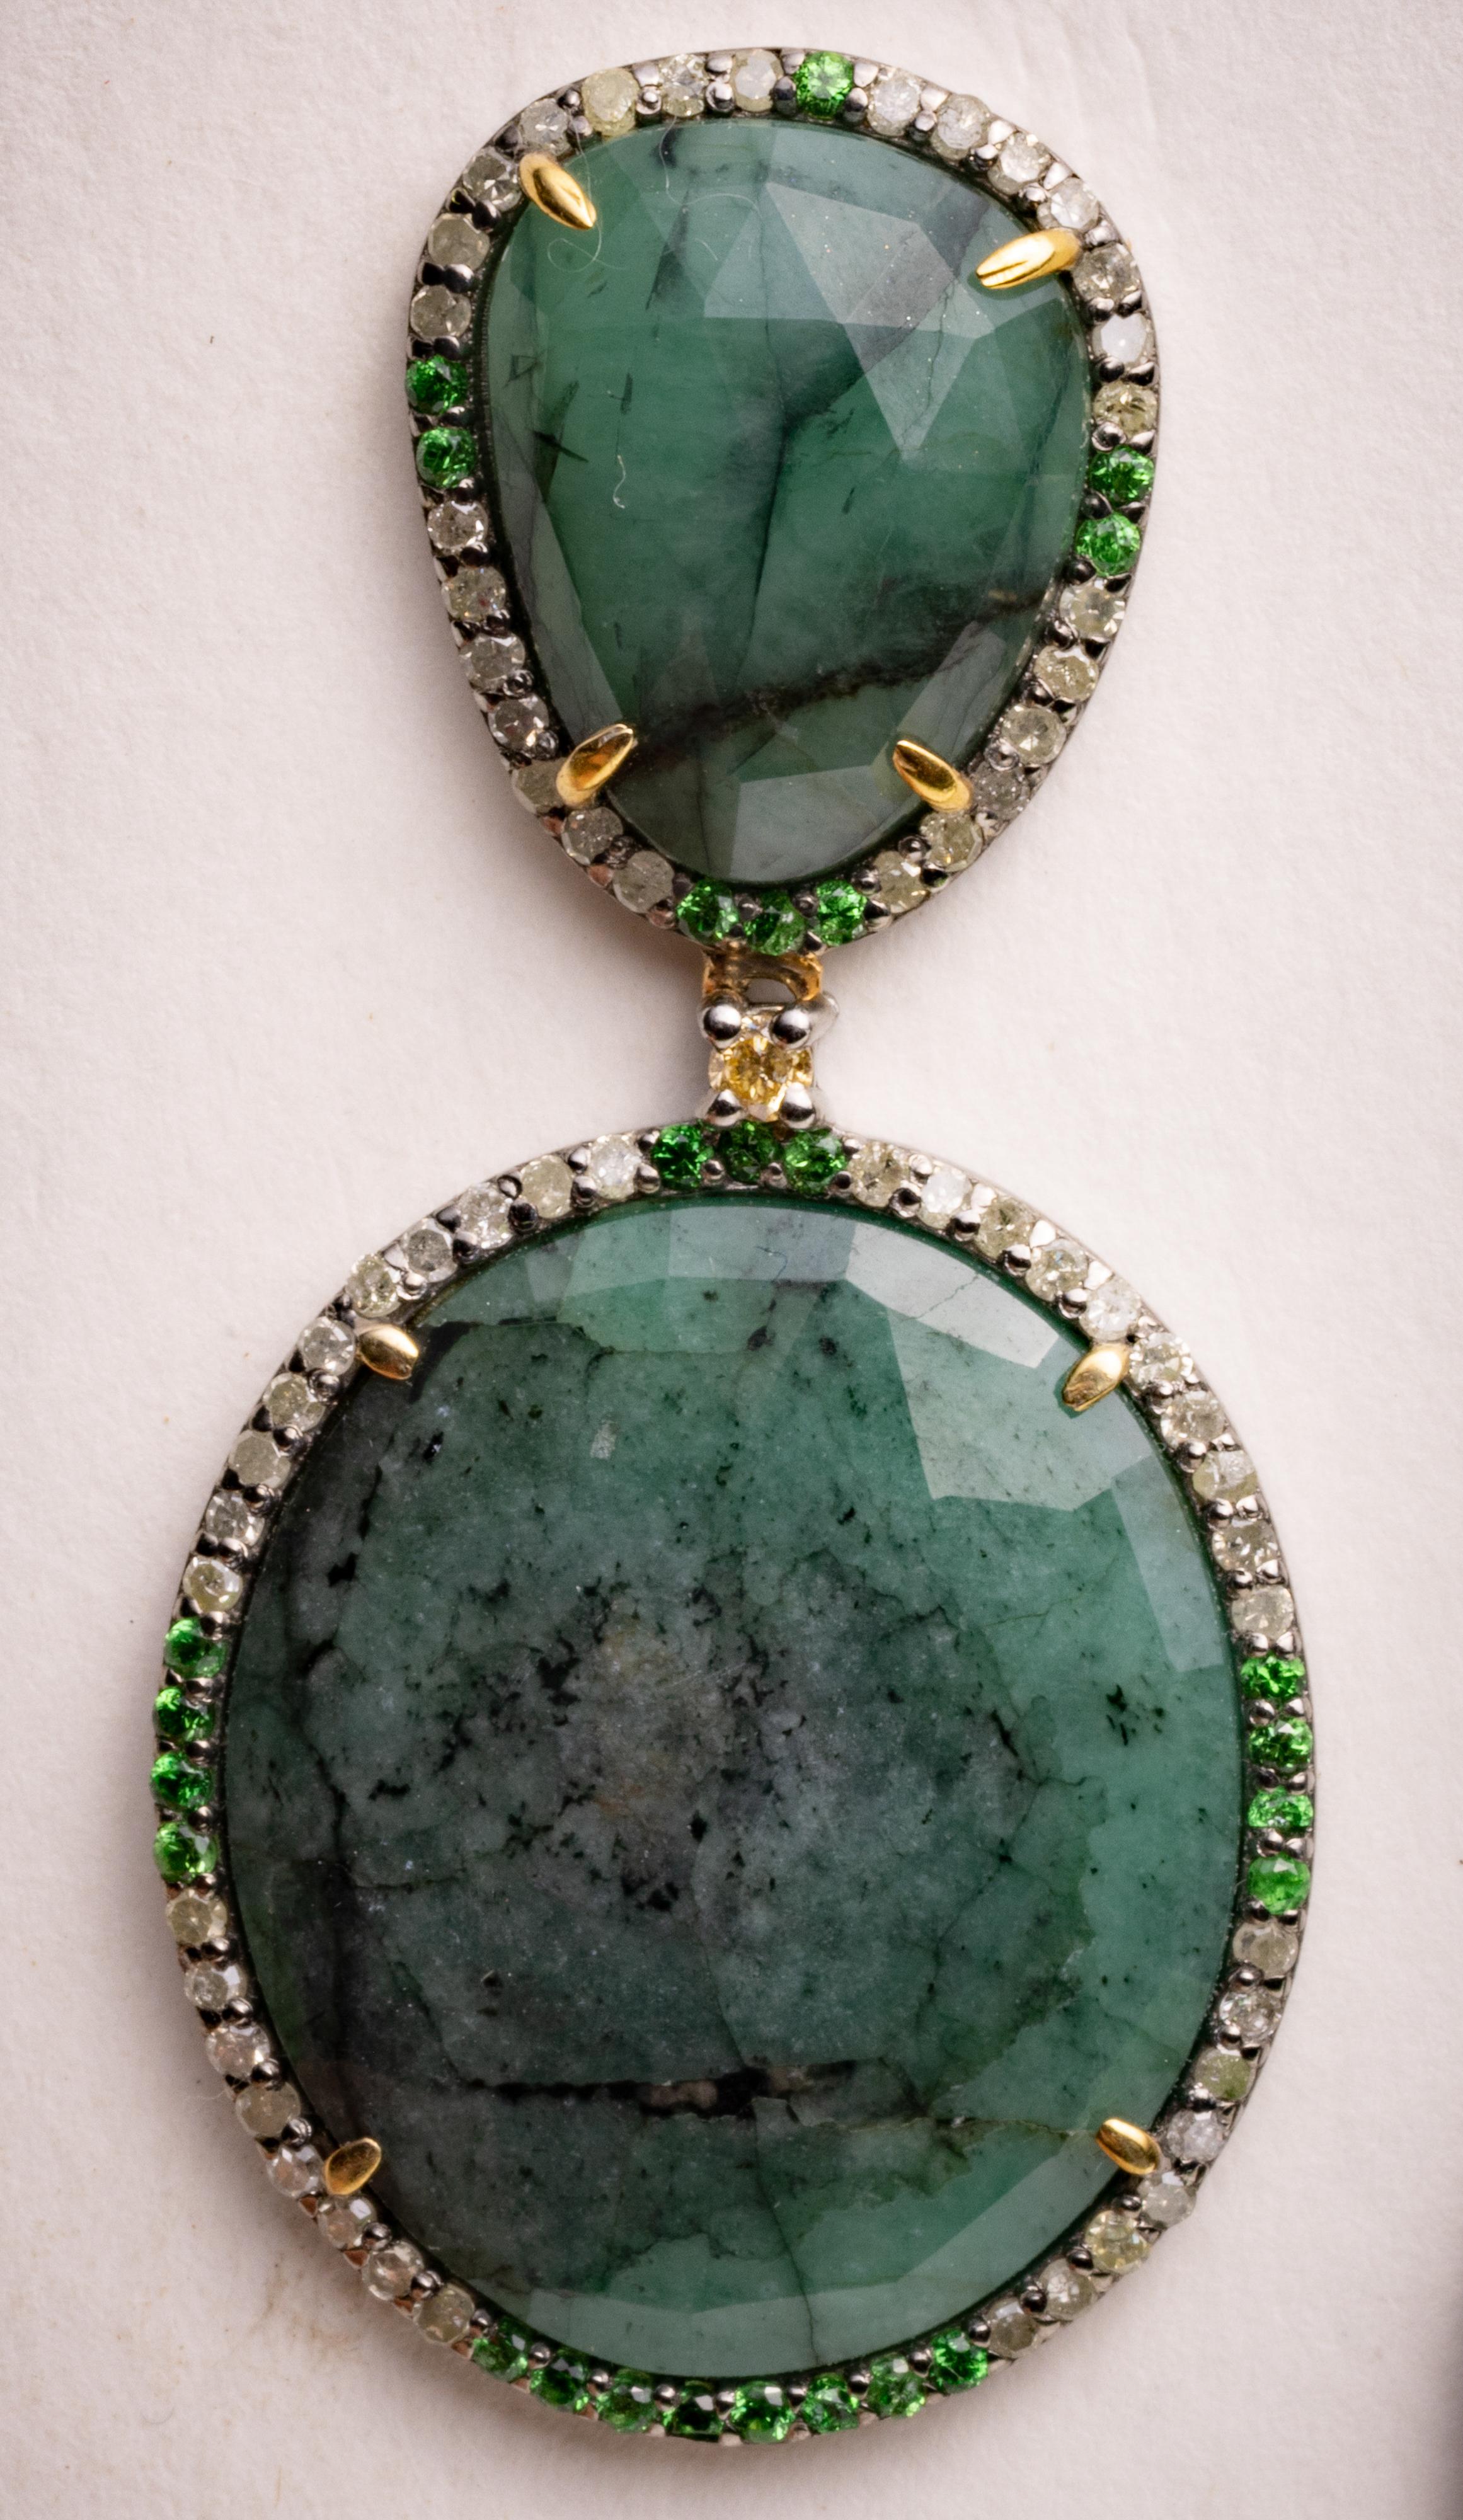 A pair of double drop, sliced rosecut emerald  gemstones bordered with pave`-set, round brilliant-cut diamonds and tsavorite gems.  Emeralds total 25.82 carats, diamonds total 1.26 carats and the tsavorite gems total .45 carats.  Set in sterling